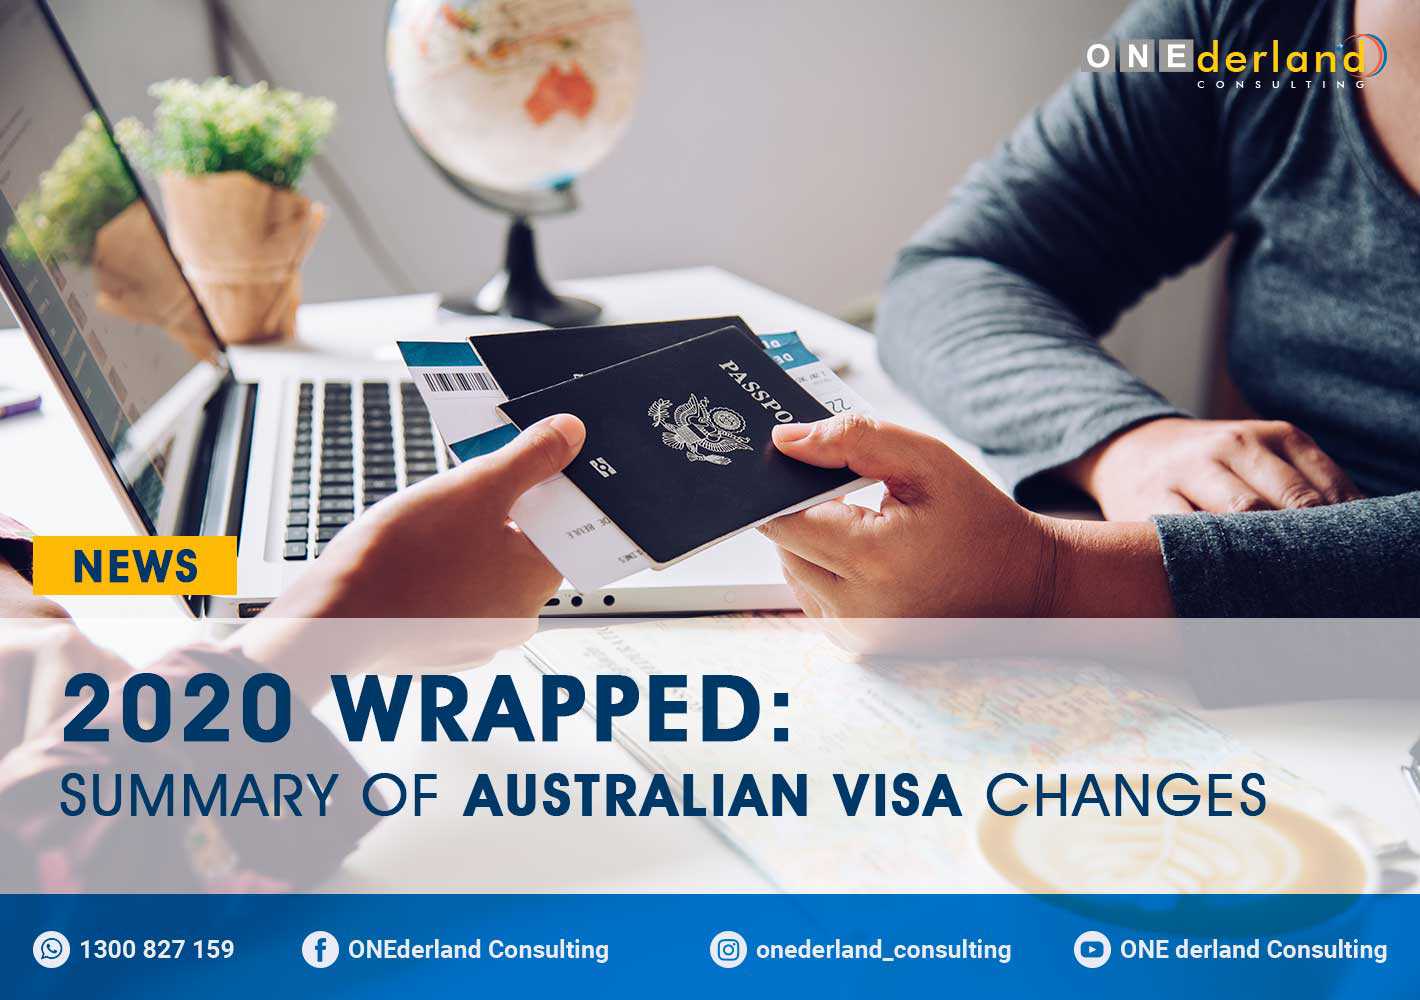 2020 Wrapped Summary of Australian Visa Changes